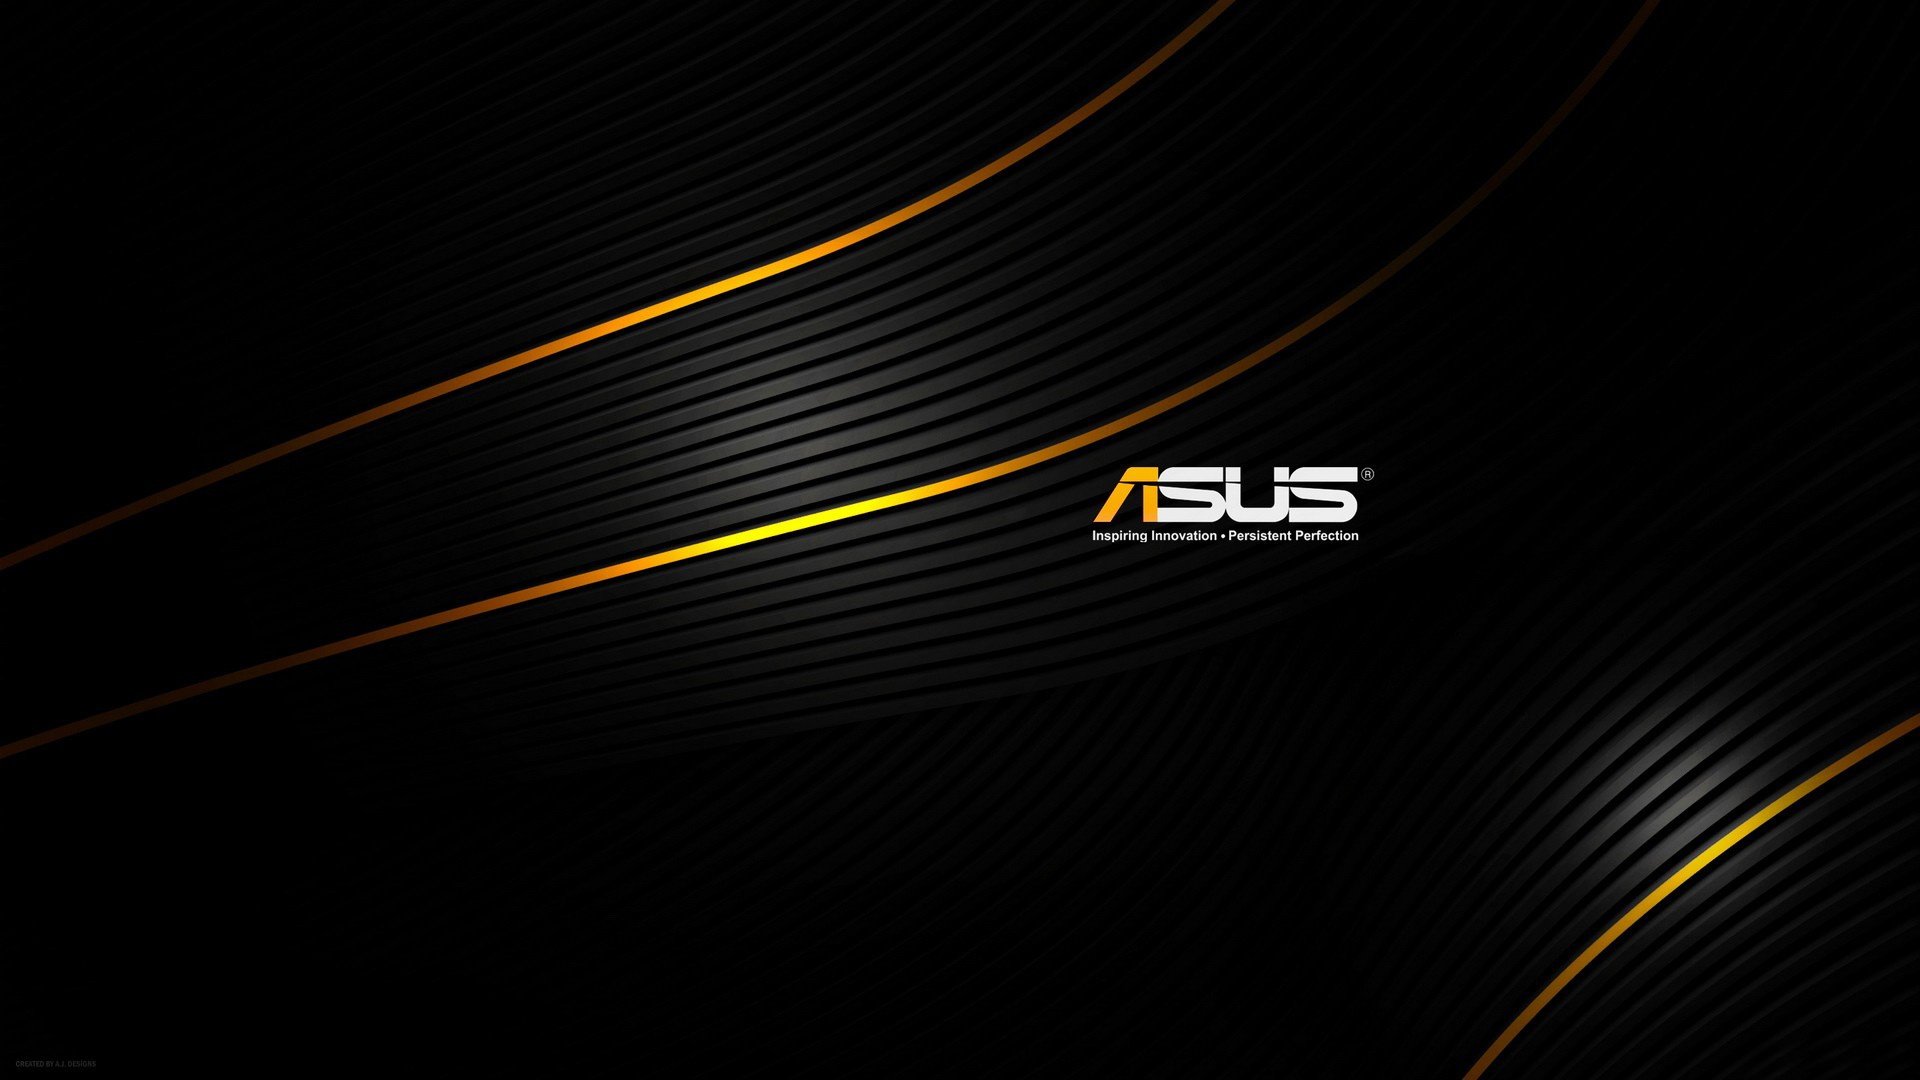 Asus Black Background Wallpapers   1920x1080   250550